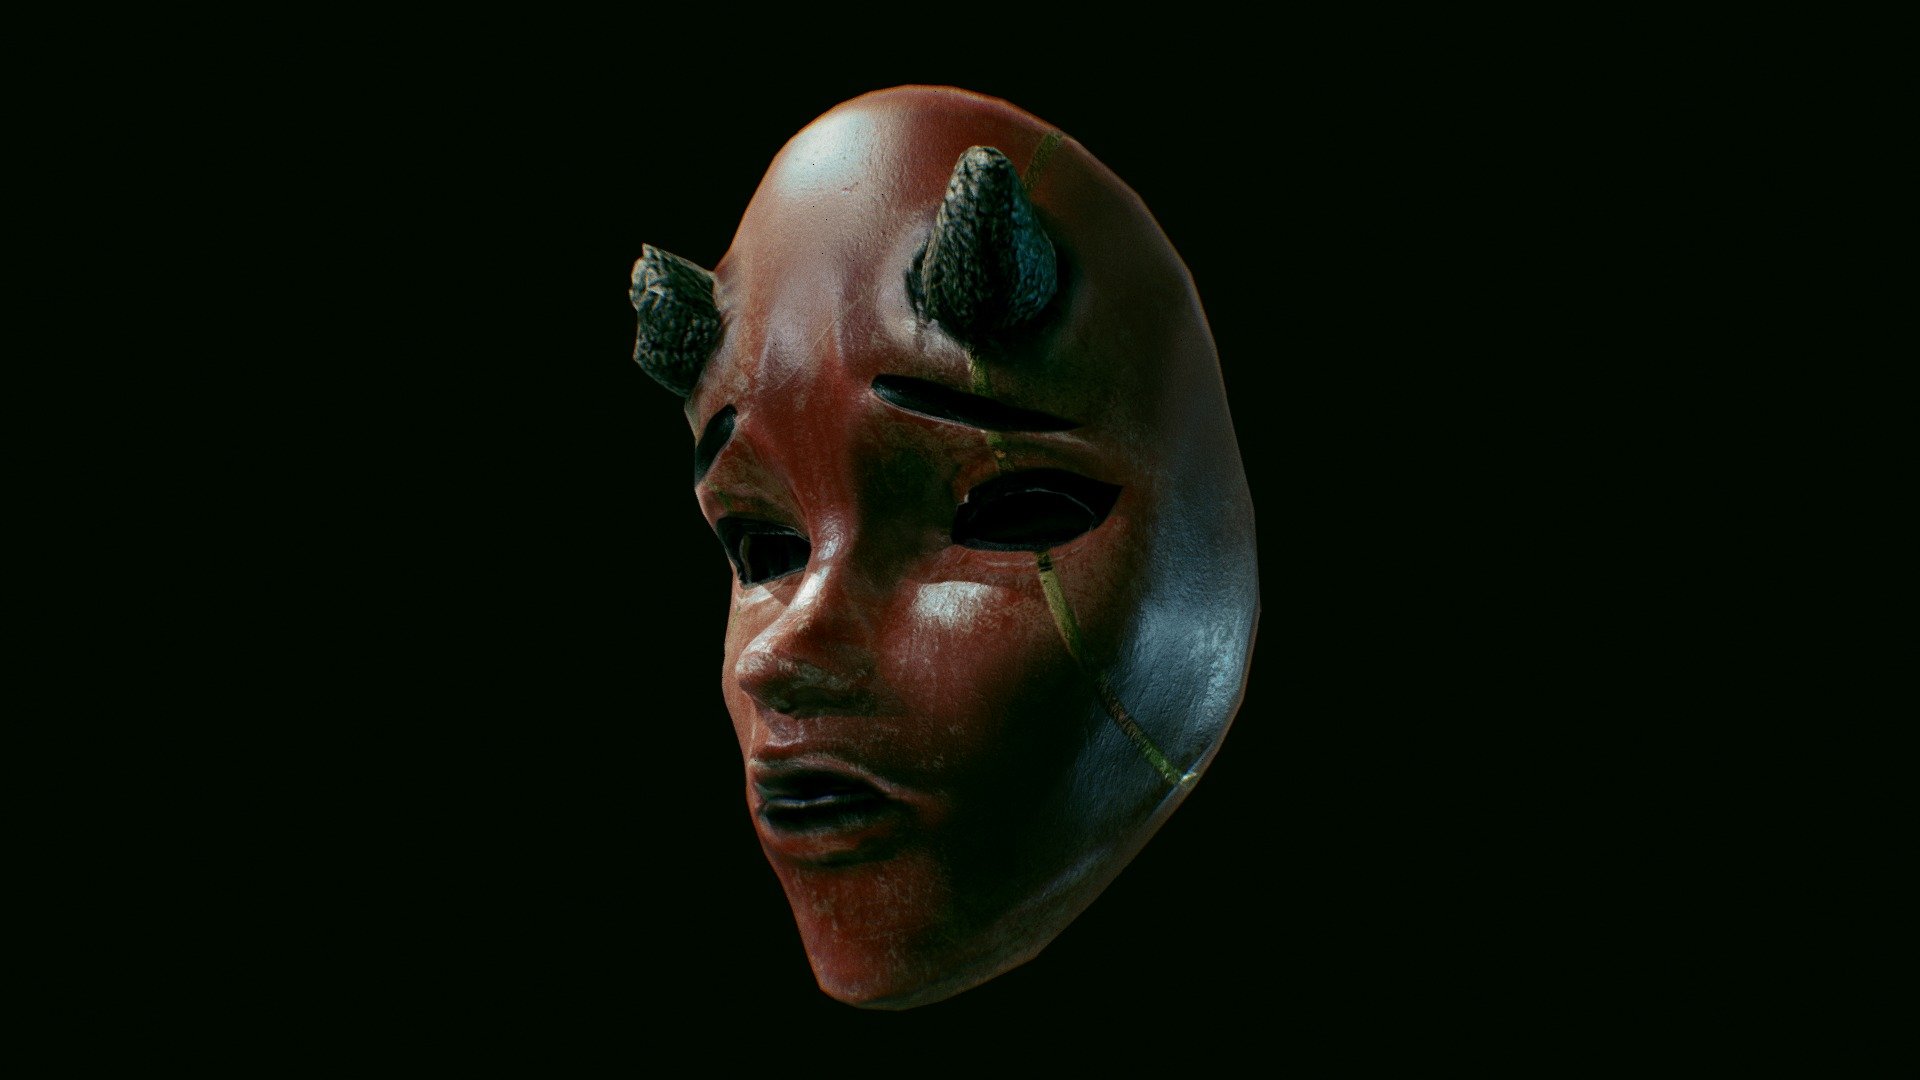 Japan inspired Demon Mask

Sculpted in Zbrush
Retopo in Maya
Textured in Substance Painter

You can find the full renders here
https://www.artstation.com/artwork/xYnEAW
https://www.artstation.com/artwork/6bl386 - Demon Mask - 3D model by firdauskazman 3d model